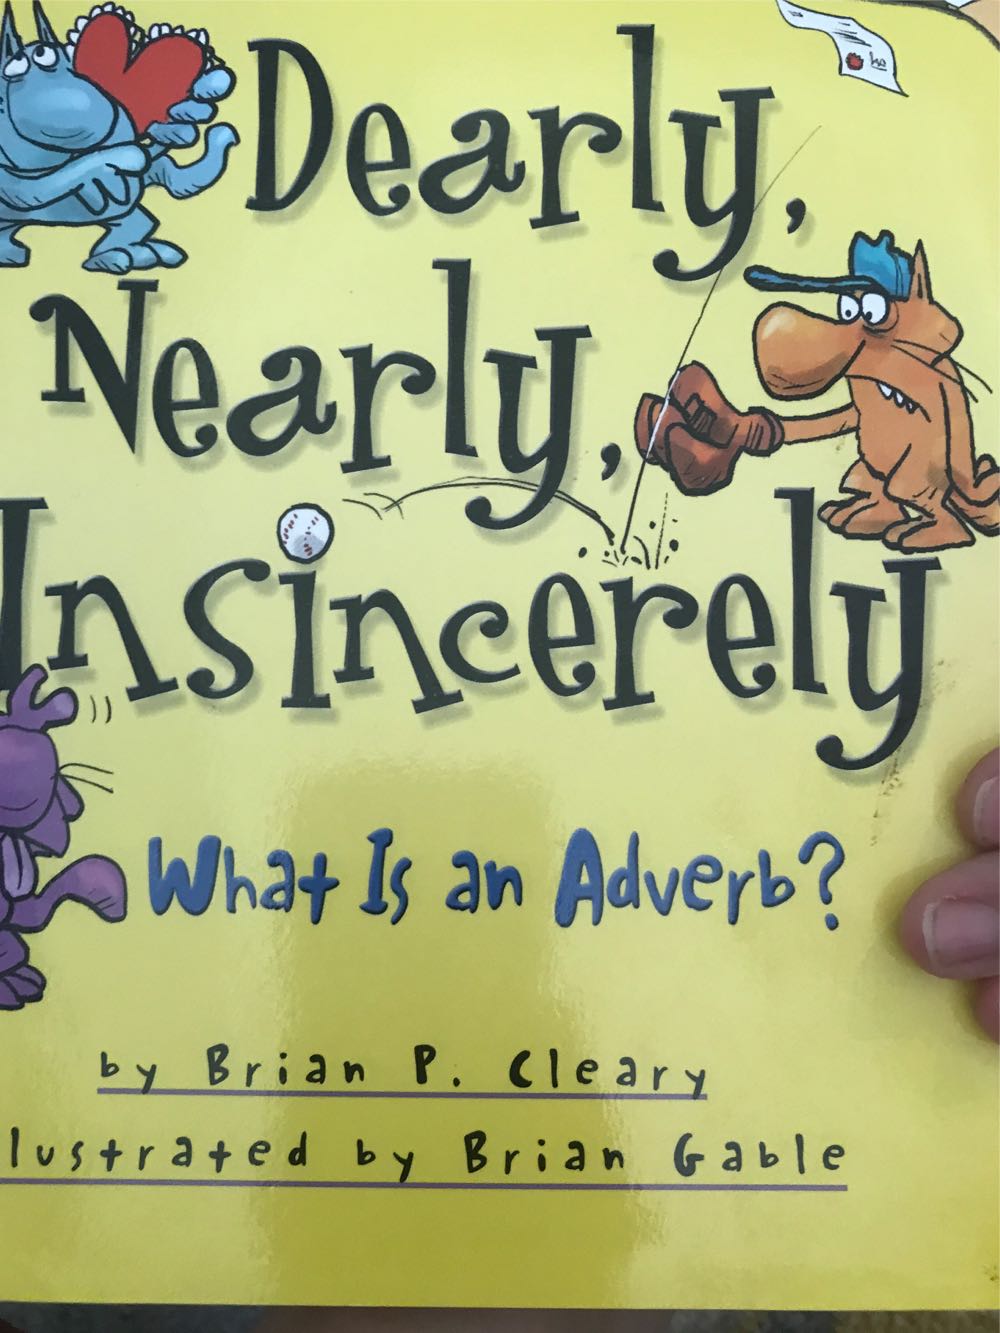 Dearly, Nearly, Insincerely: What Is An Adverb - Brian P. Cleary (- Hardcover) book collectible [Barcode 9788003284924] - Main Image 1